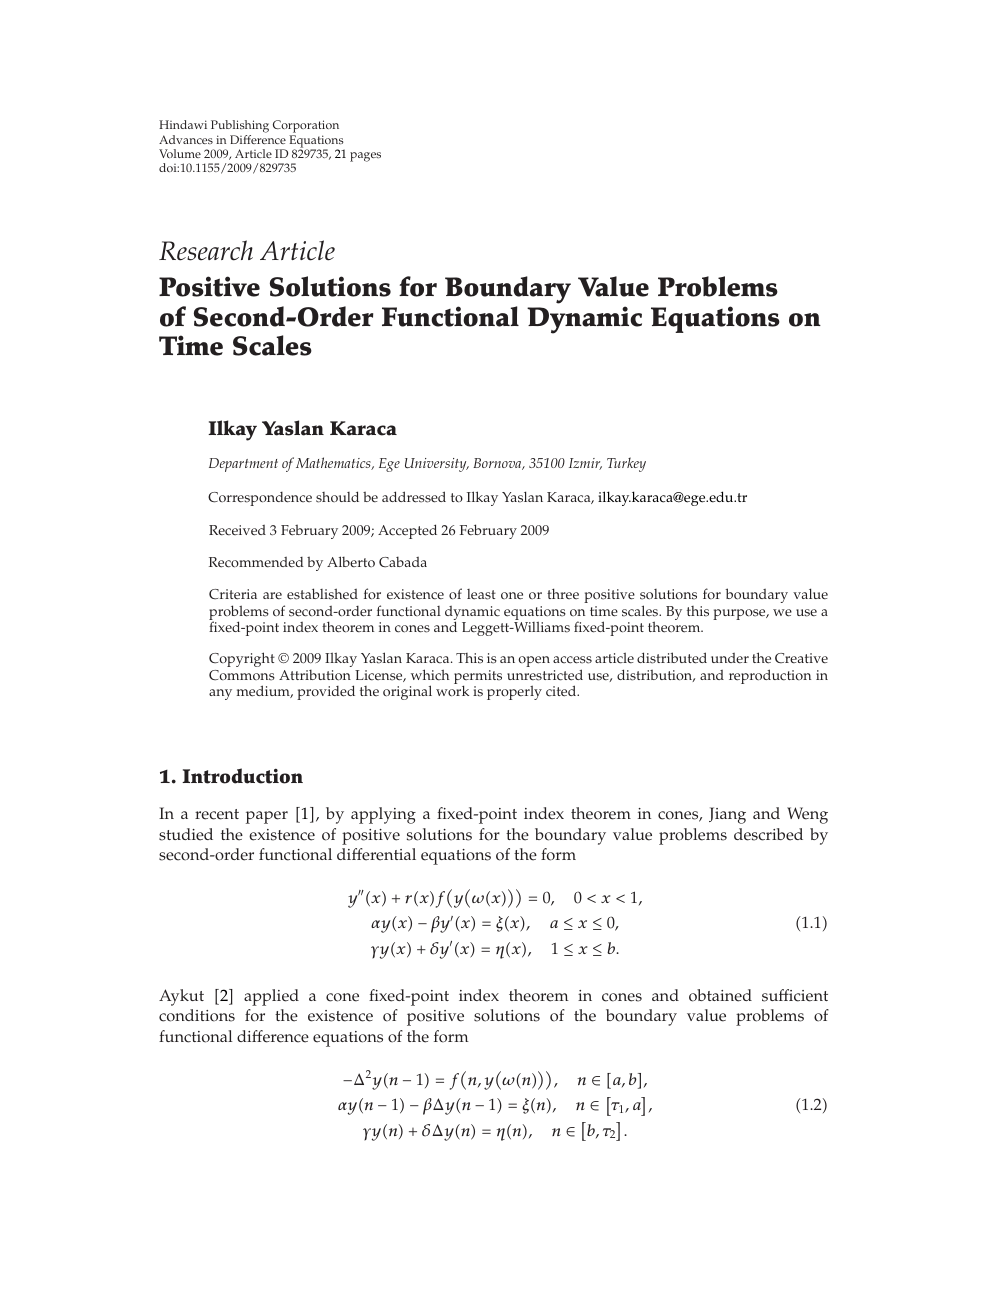 Positive Solutions For Boundary Value Problems Of Second Order Functional Dynamic Equations On Time Scales Topic Of Research Paper In Mathematics Download Scholarly Article Pdf And Read For Free On Cyberleninka Open